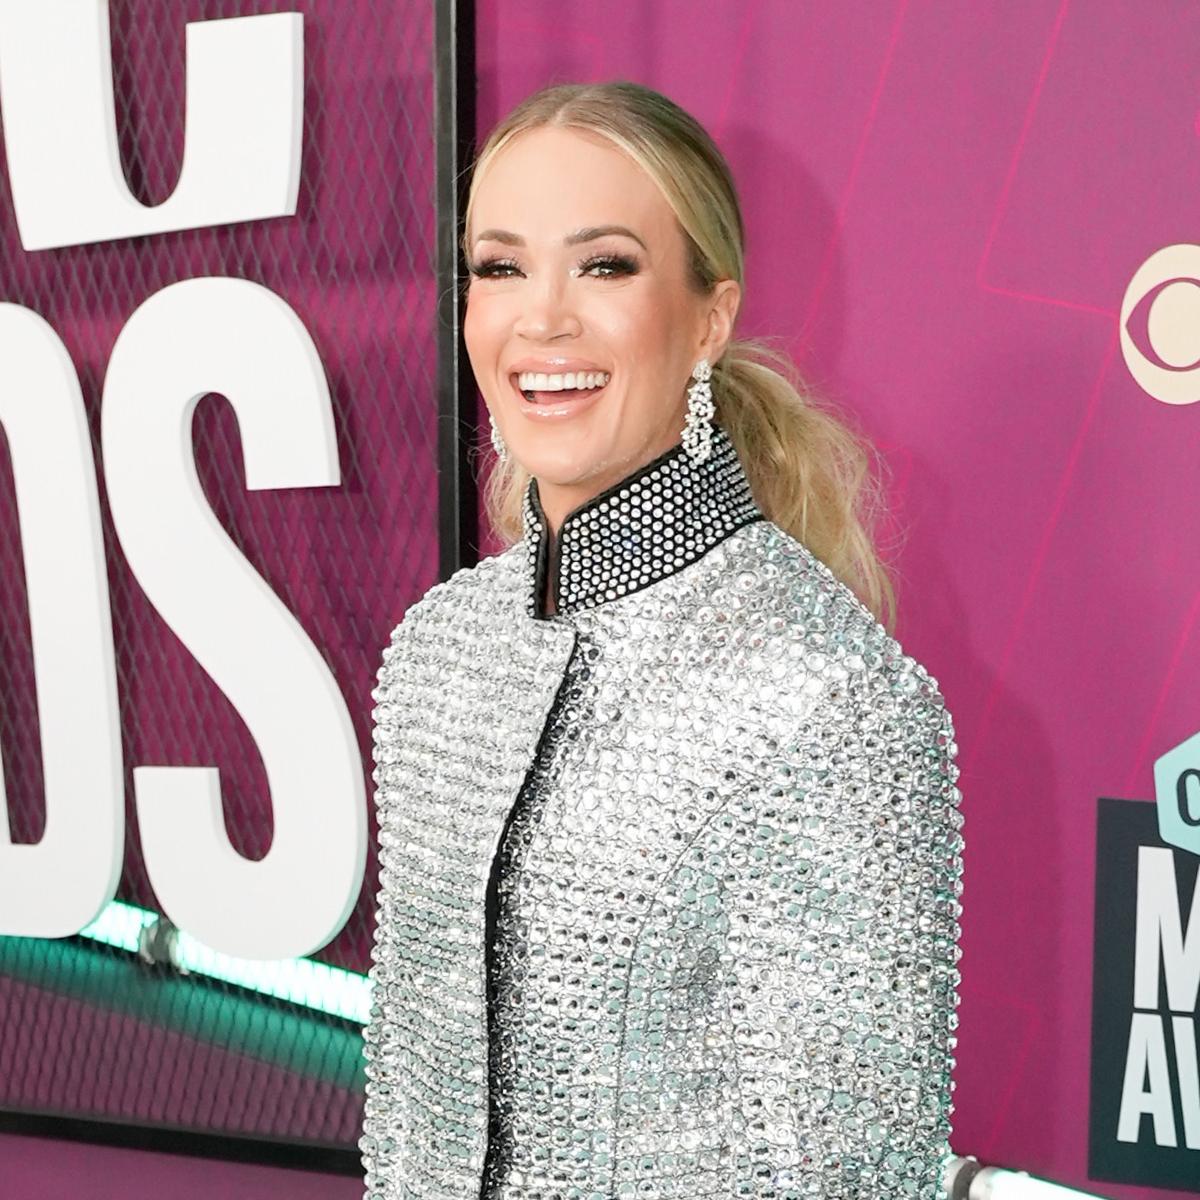 Carrie Underwood Launches Fitness Lifestyle Brand With NYC Press Event 